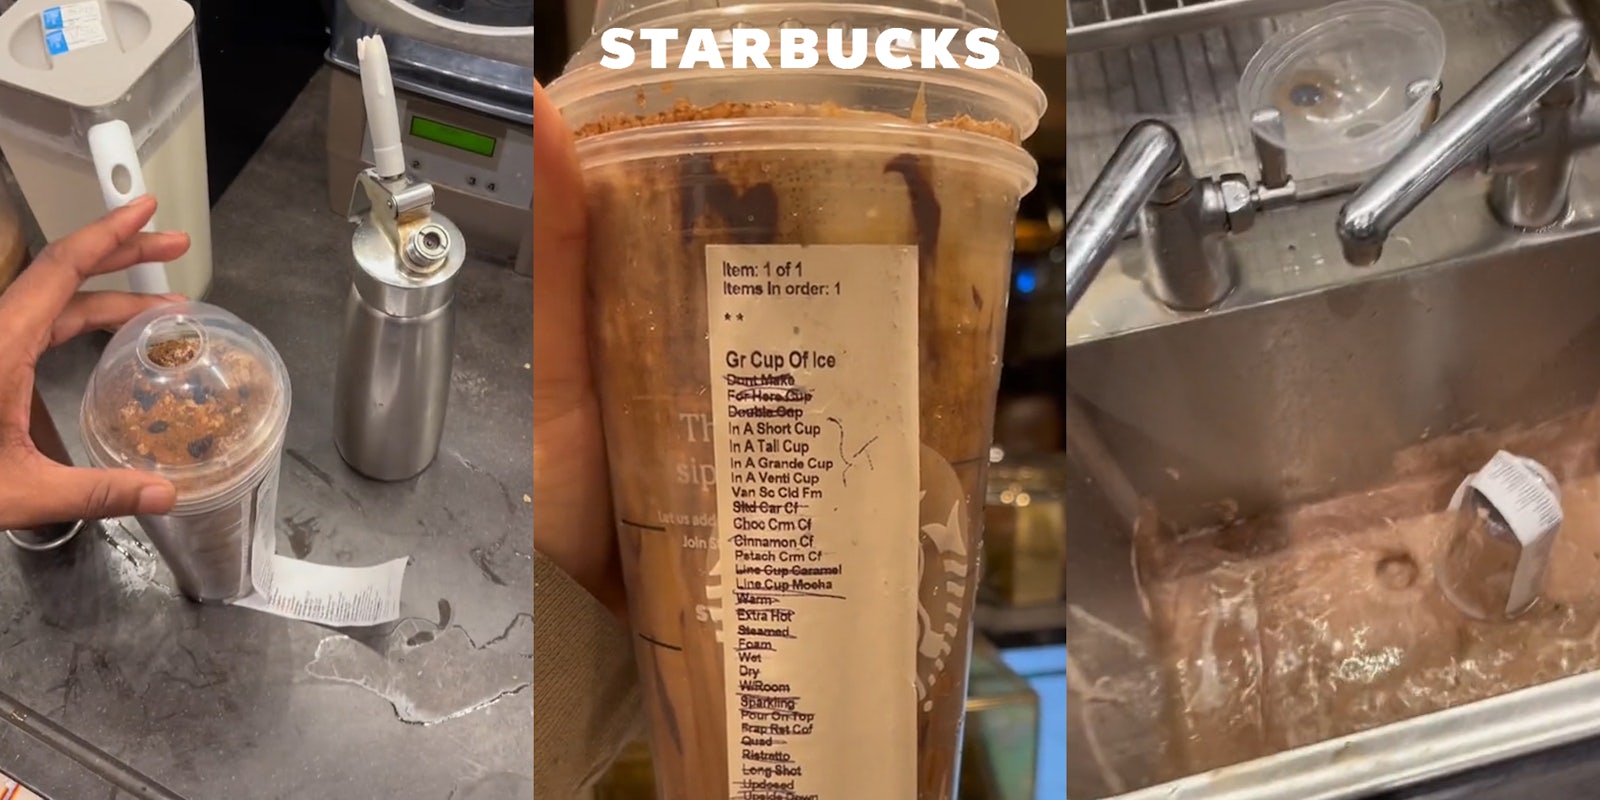 Starbucks barista with hand on drink with long label (l) Starbucks drink with long label with Starbucks logo up top (c) Starbucks drink spilled in sink (r)